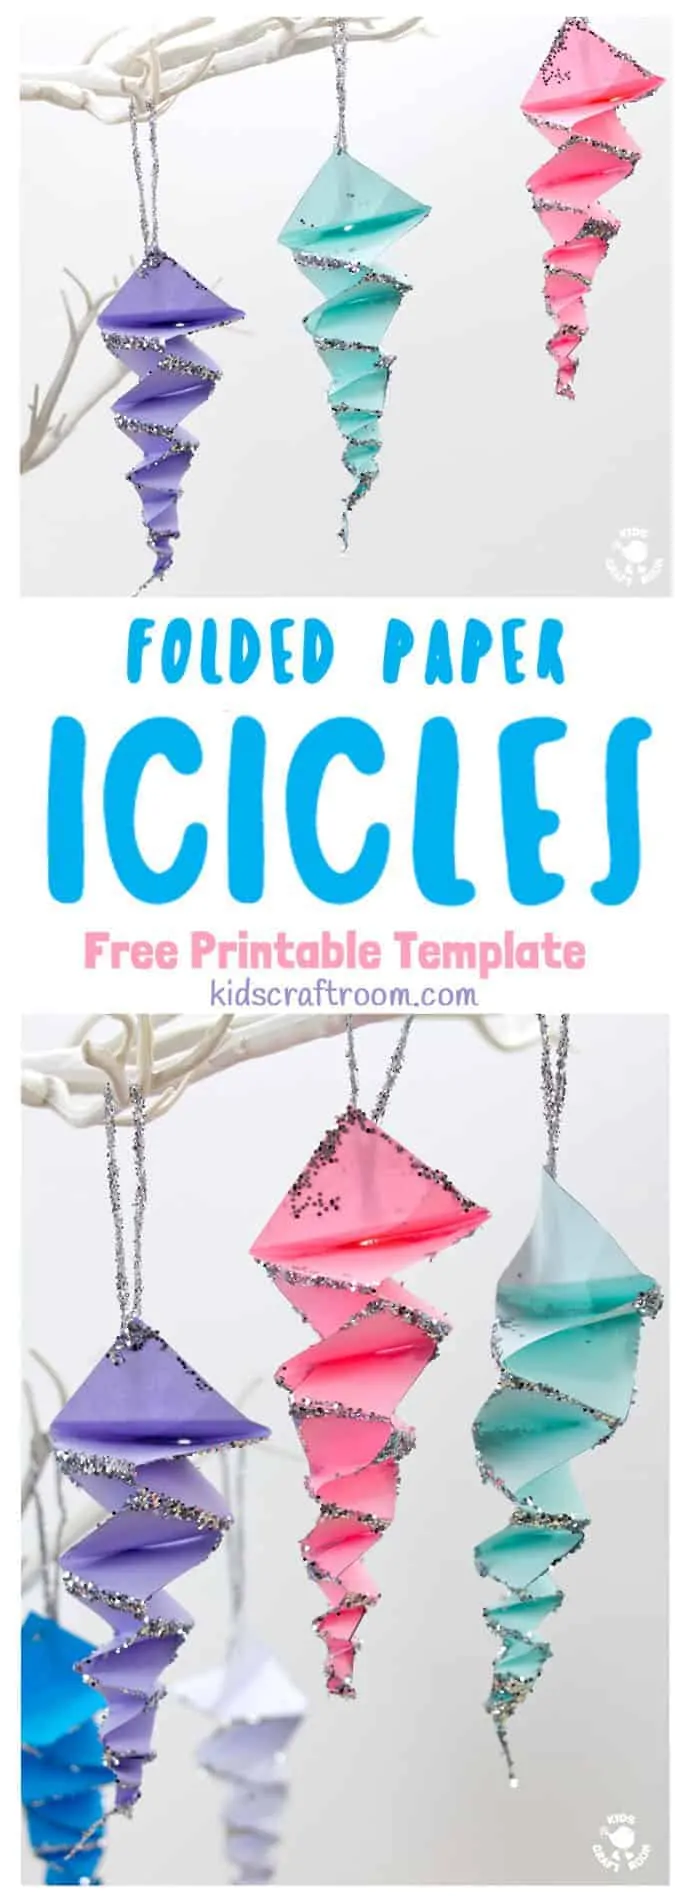 A collection of Folded Paper Icicle Crafts hanging from white tree branches. They are in a range of pastel colours and are sprinkled with glitter.